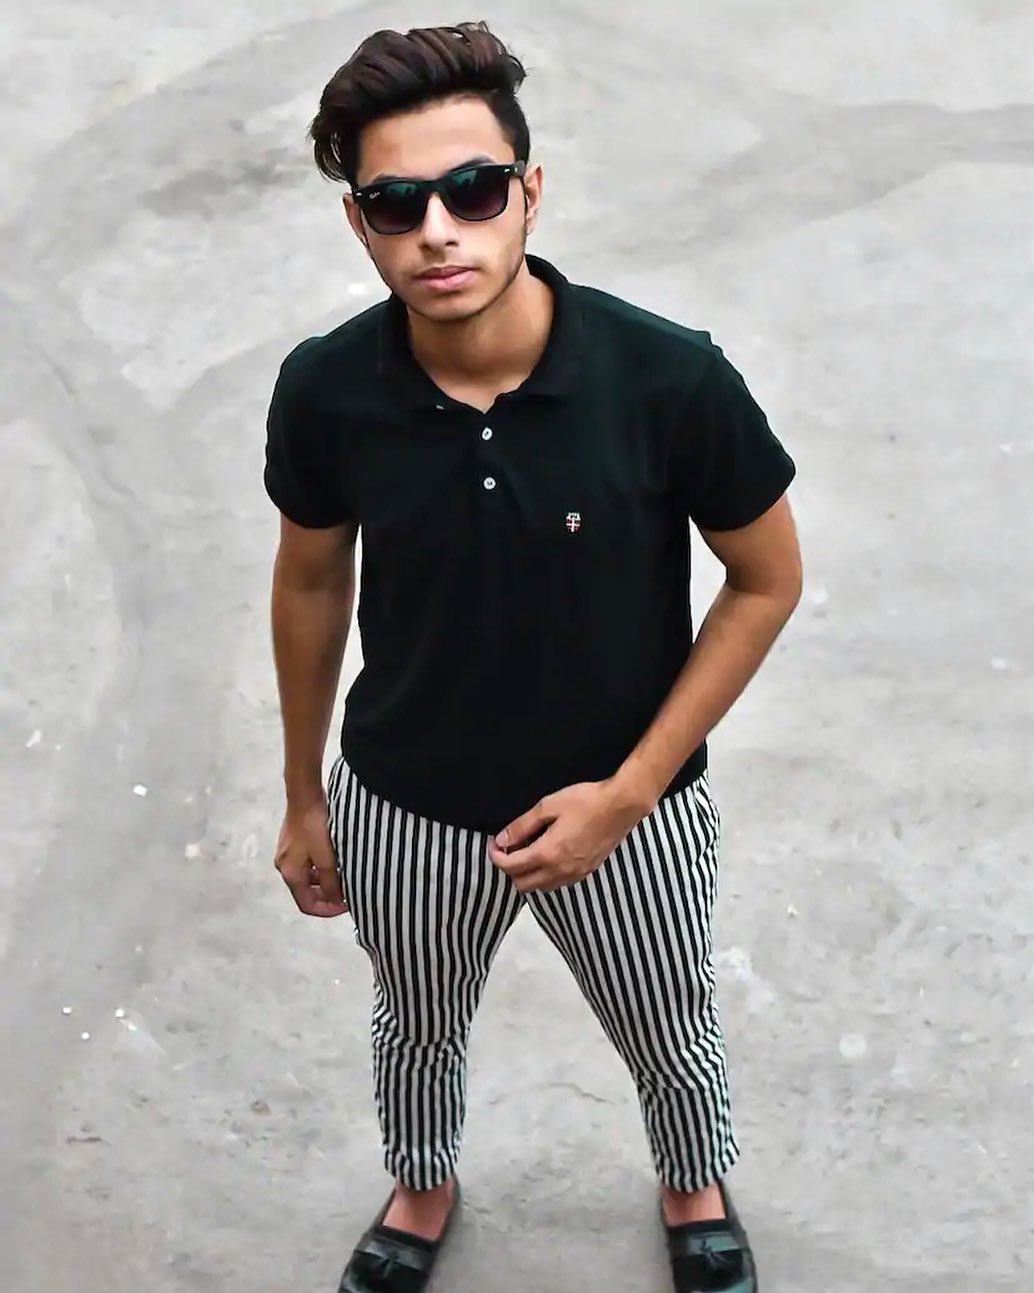 MYNTRA - A polo shirt with stripped pants can be your go to look for your zoom meetings or a catch-up call with the fam!
📸 @md_faiz_anwar61 
Look up similar product code: 11872040 / 9850863 / 11309358...